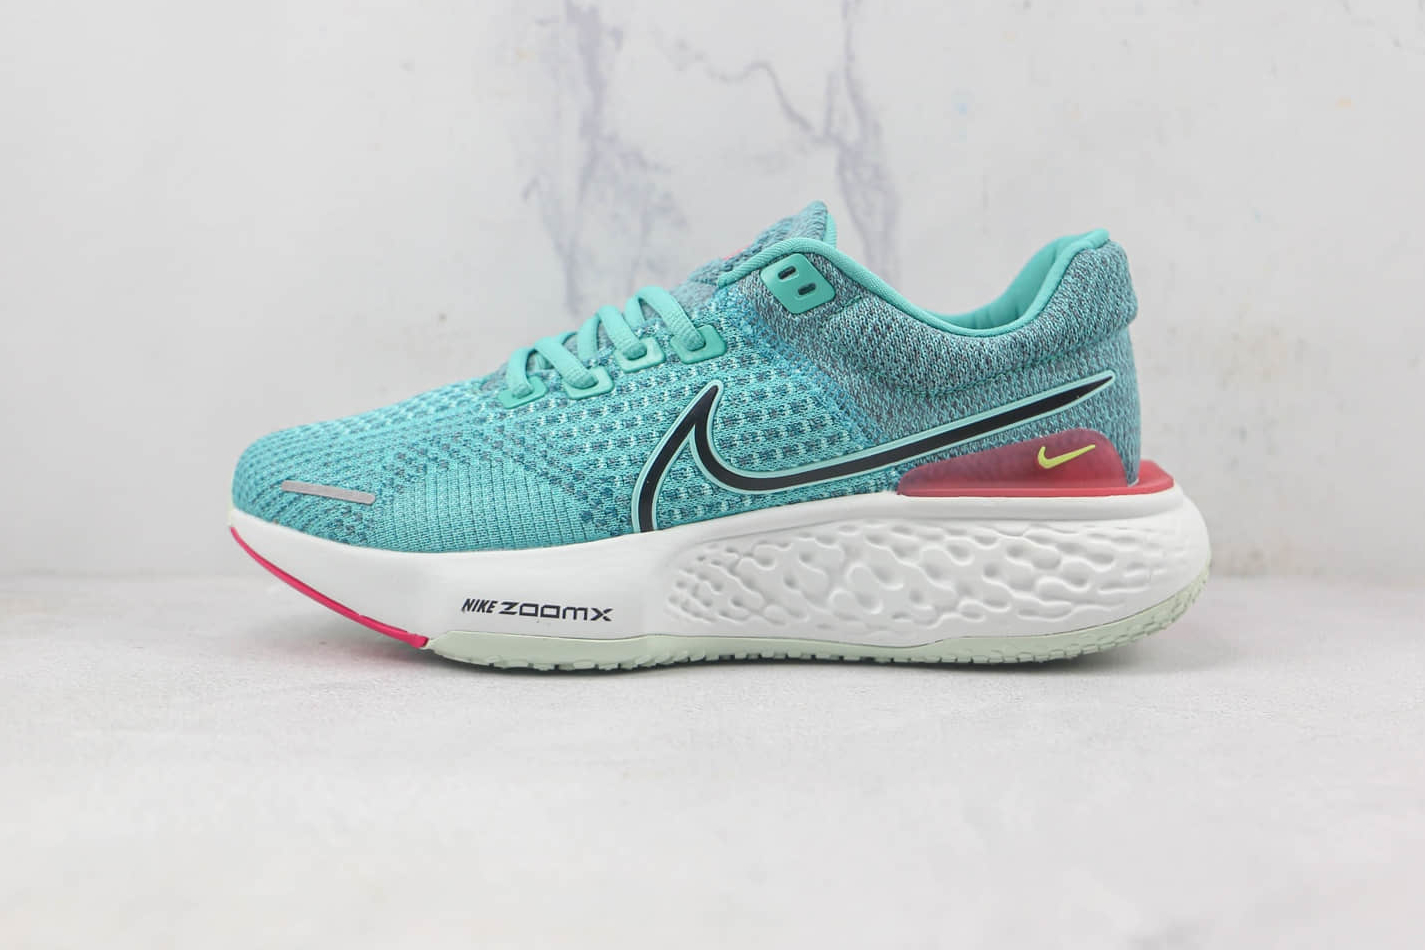 Nike ZoomX Invincible Run Flyknit 2 'Washed Teal' DC9993-300 - Energize Your Run with Stylish Comfort